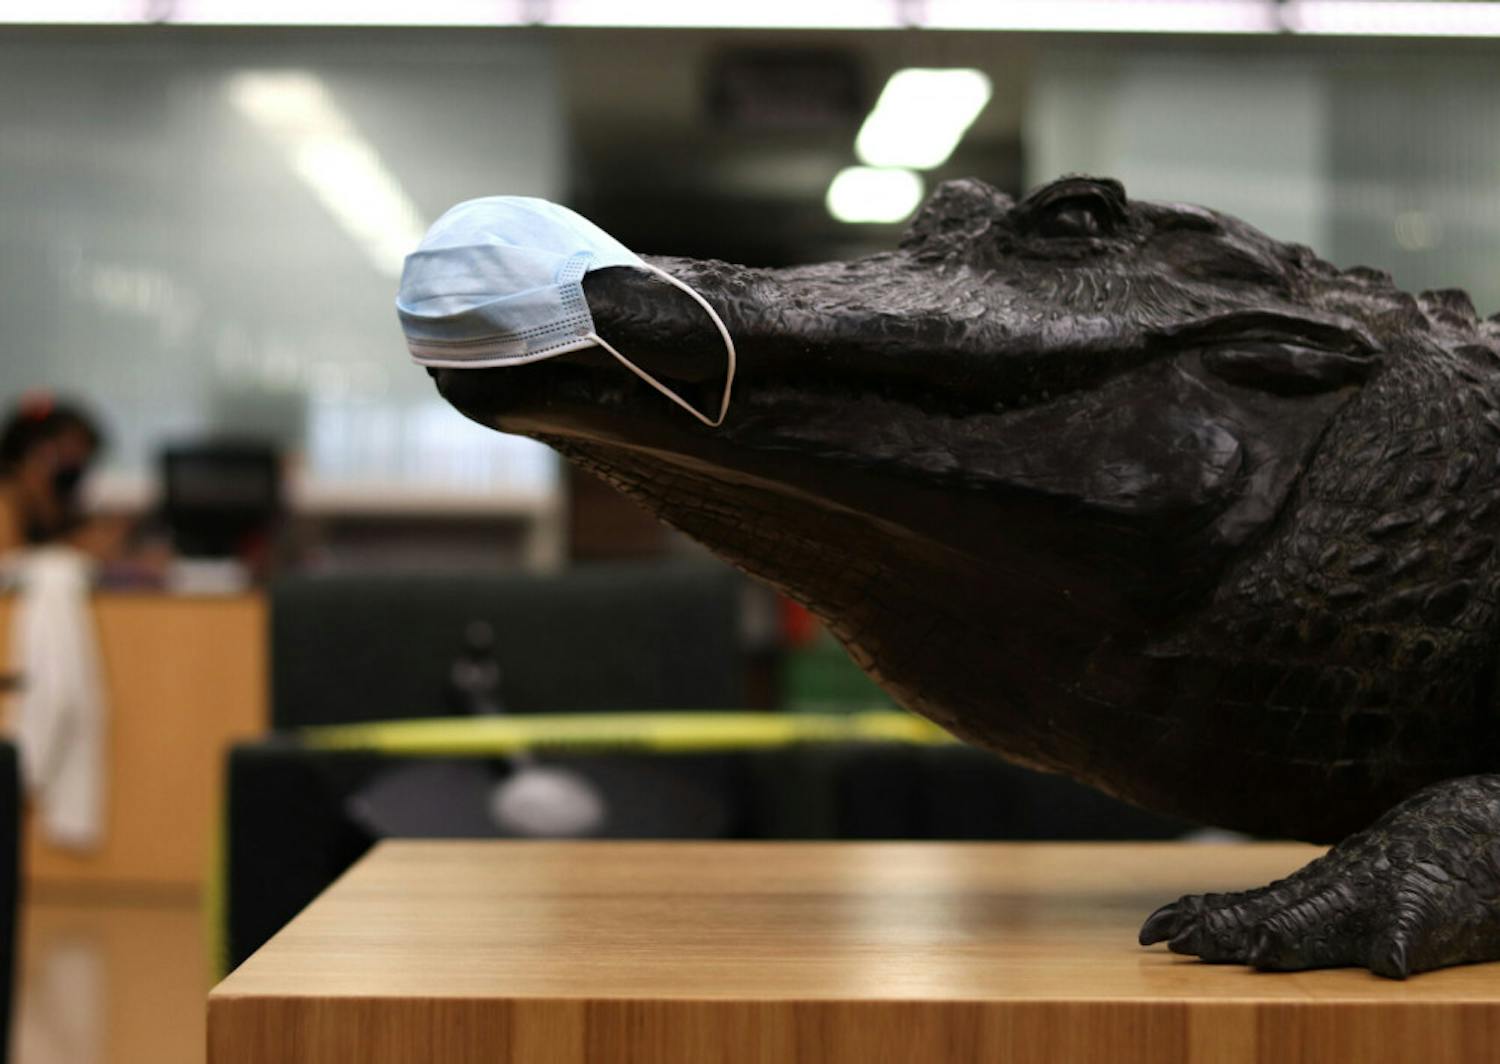 A mask is seen on the "Focused Attention" gator statue in Library West on Friday, Sept. 11, 2020. (Lauren Witte/Alligator Staff)